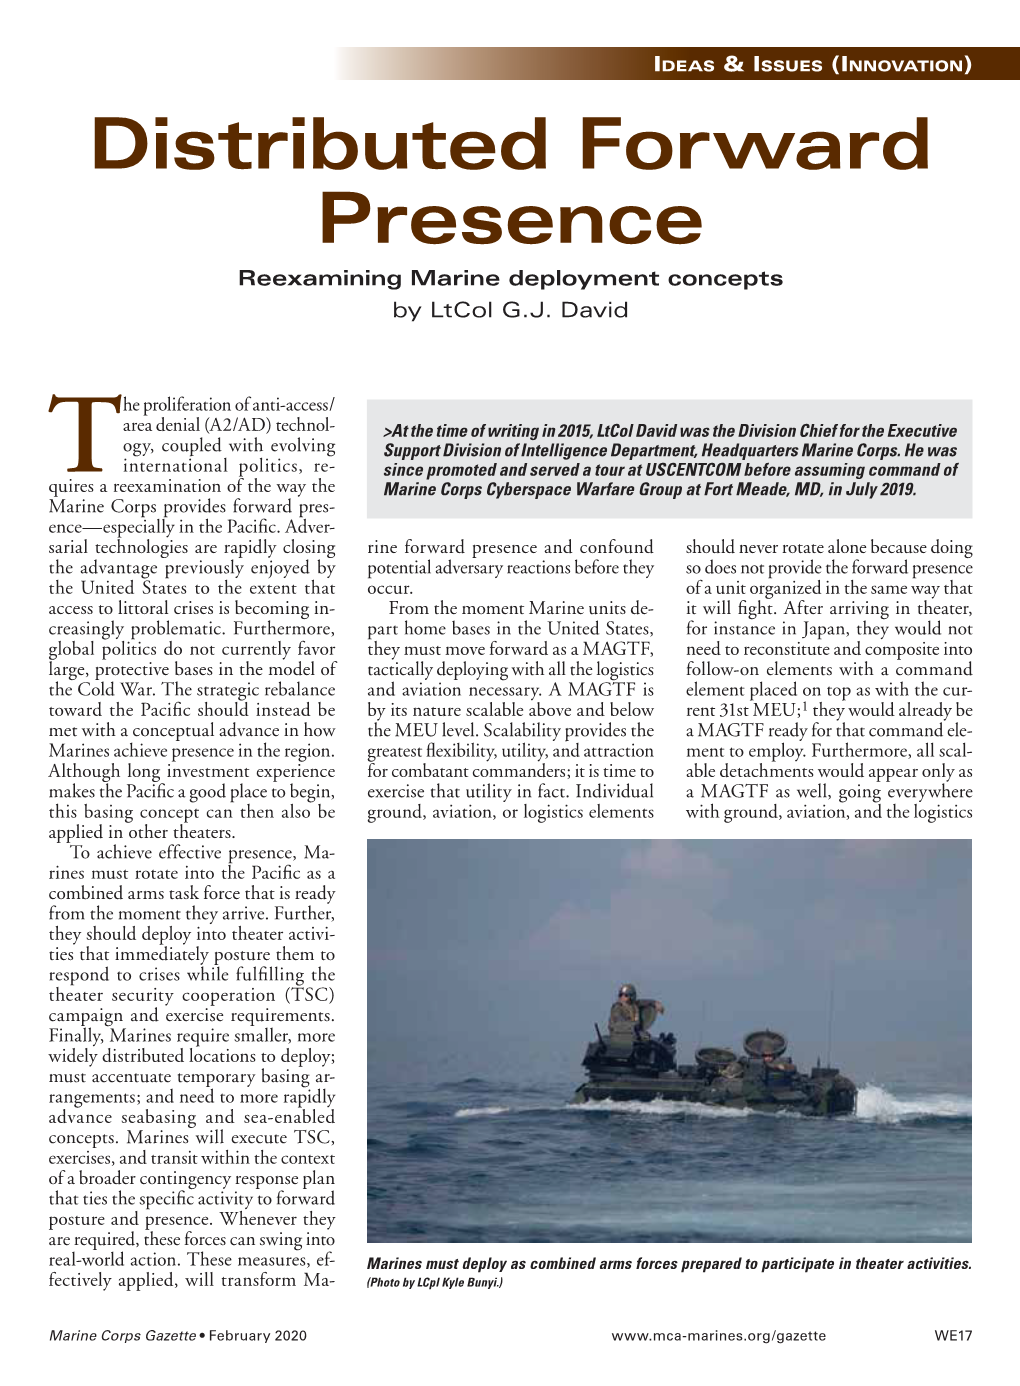 Distributed Forward Presence Reexamining Marine Deployment Concepts by Ltcol G.J